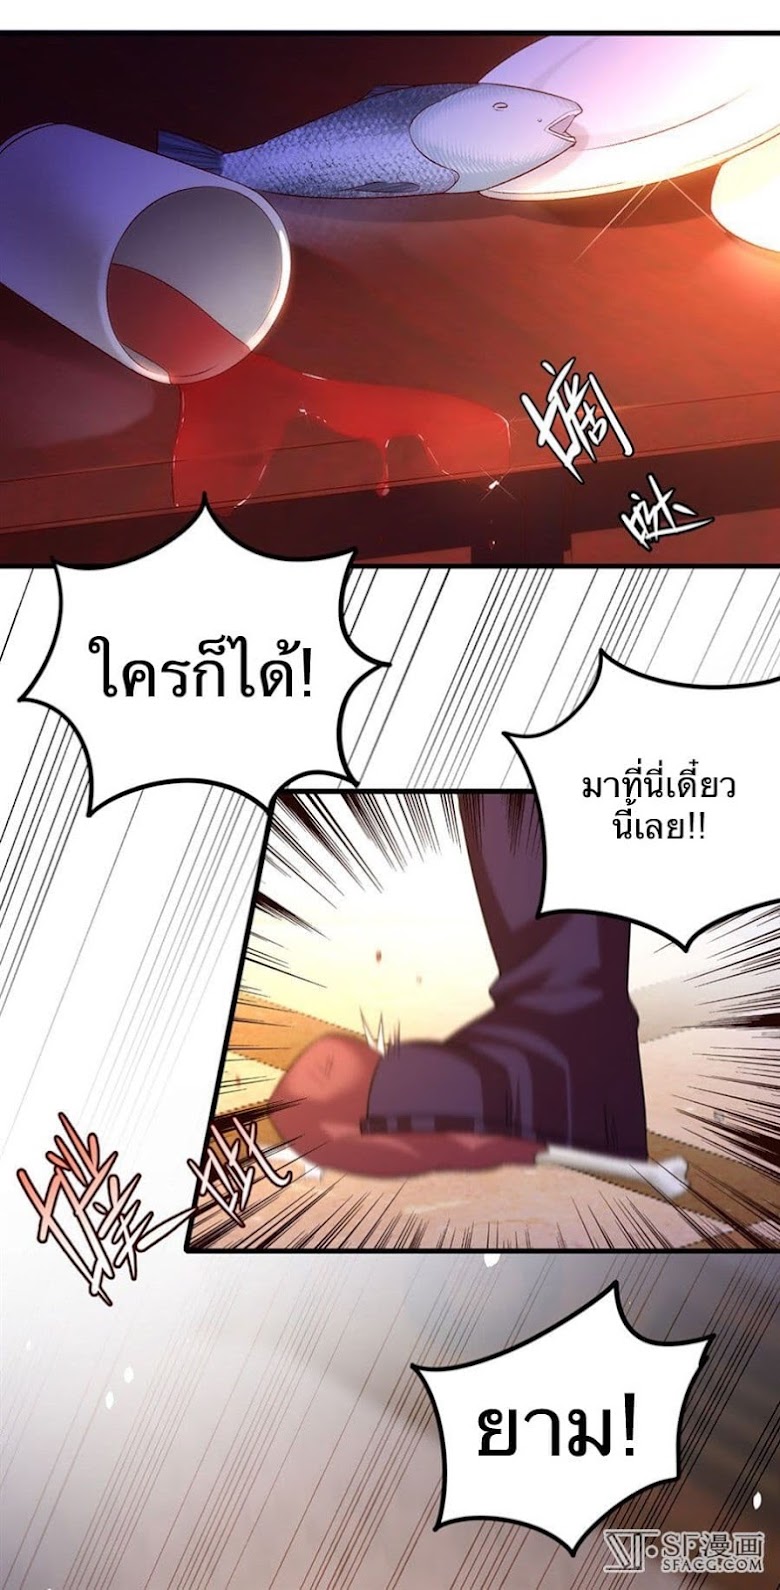 Nobleman and so what? - หน้า 4